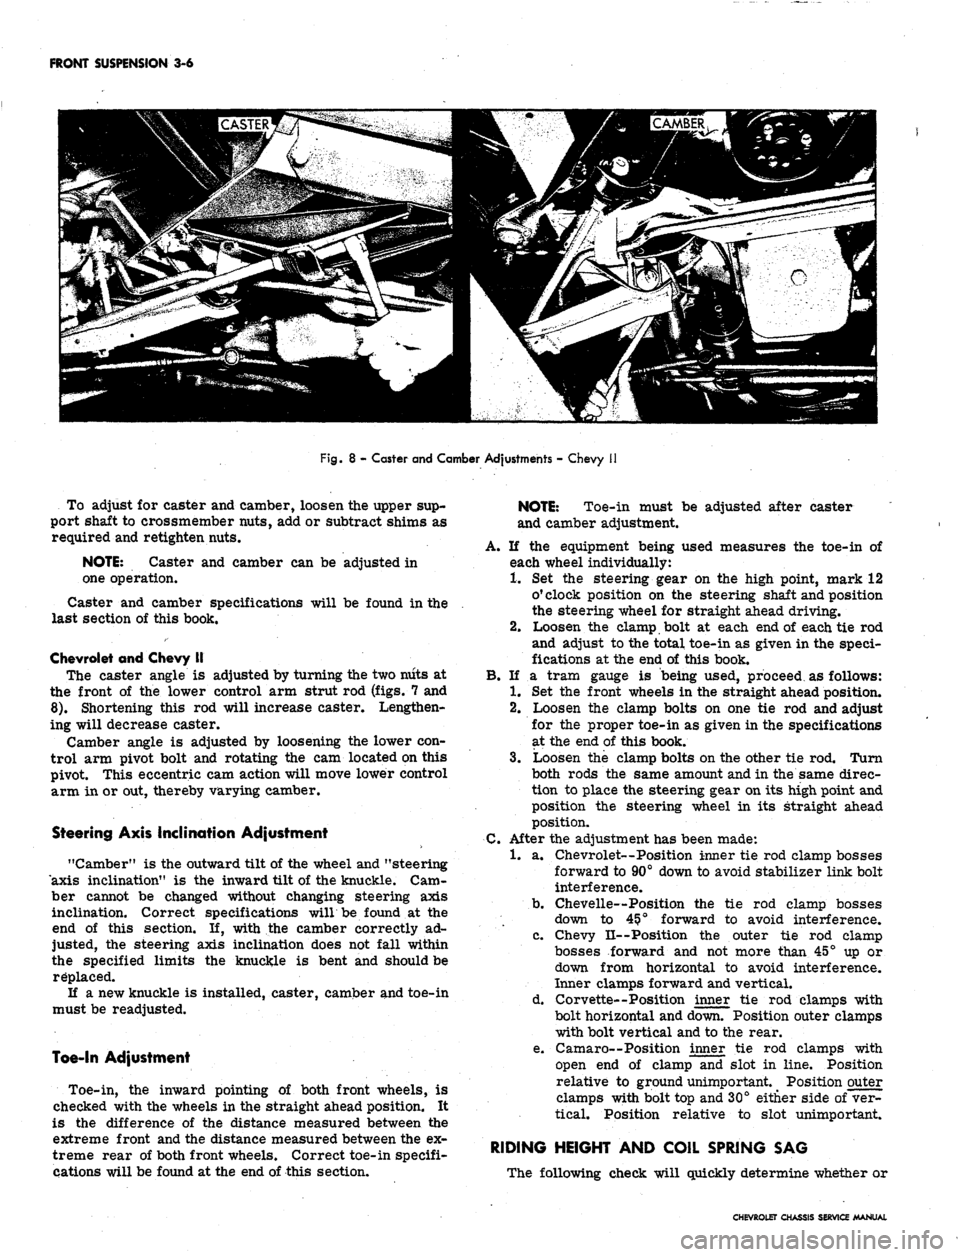 CHEVROLET CAMARO 1967 1.G Chassis User Guide 
FRONT SUSPENSION 3-6

Fig.
 8 - Caster and Camber Adjustments - Chevy

To adjust for caster and camber, loosen the upper sup-

port shaft to crossmember nuts, add or subtract shims as

required and r